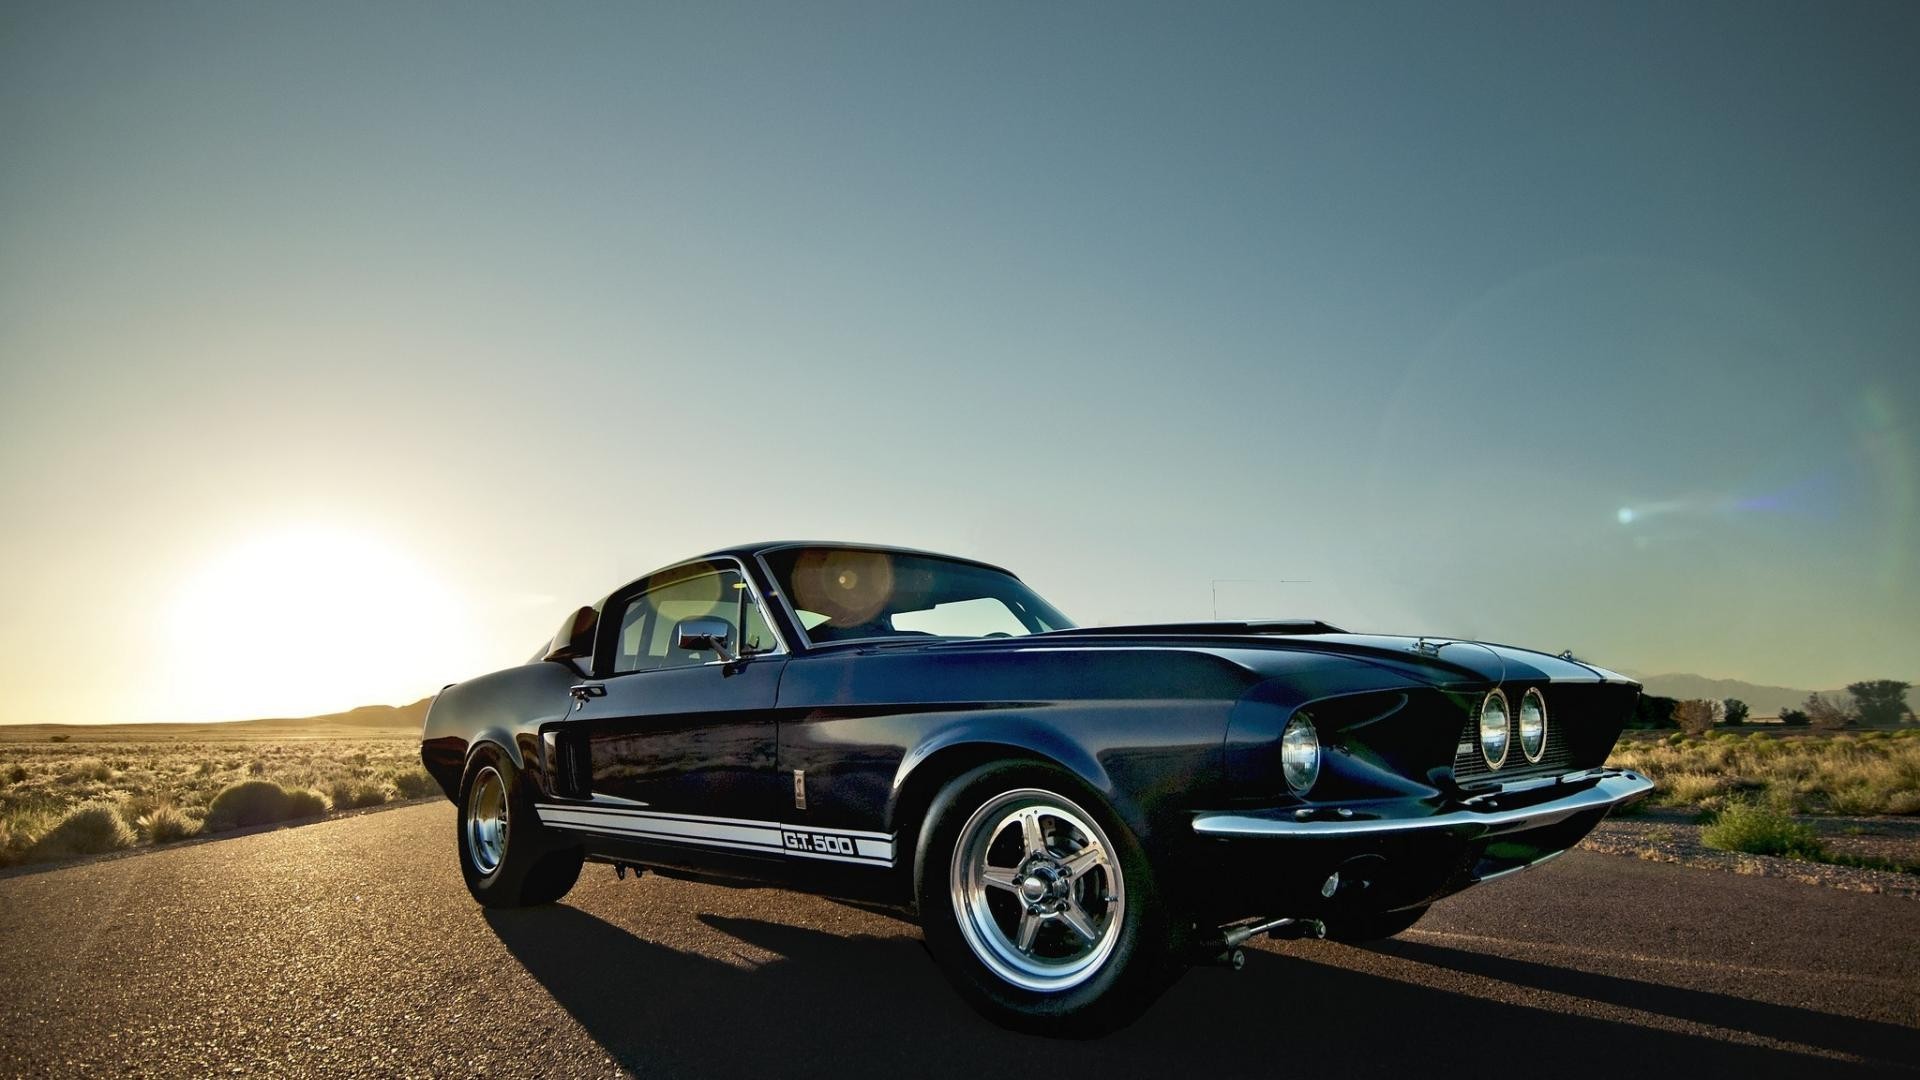 1920x1080 Classic Mustang Background